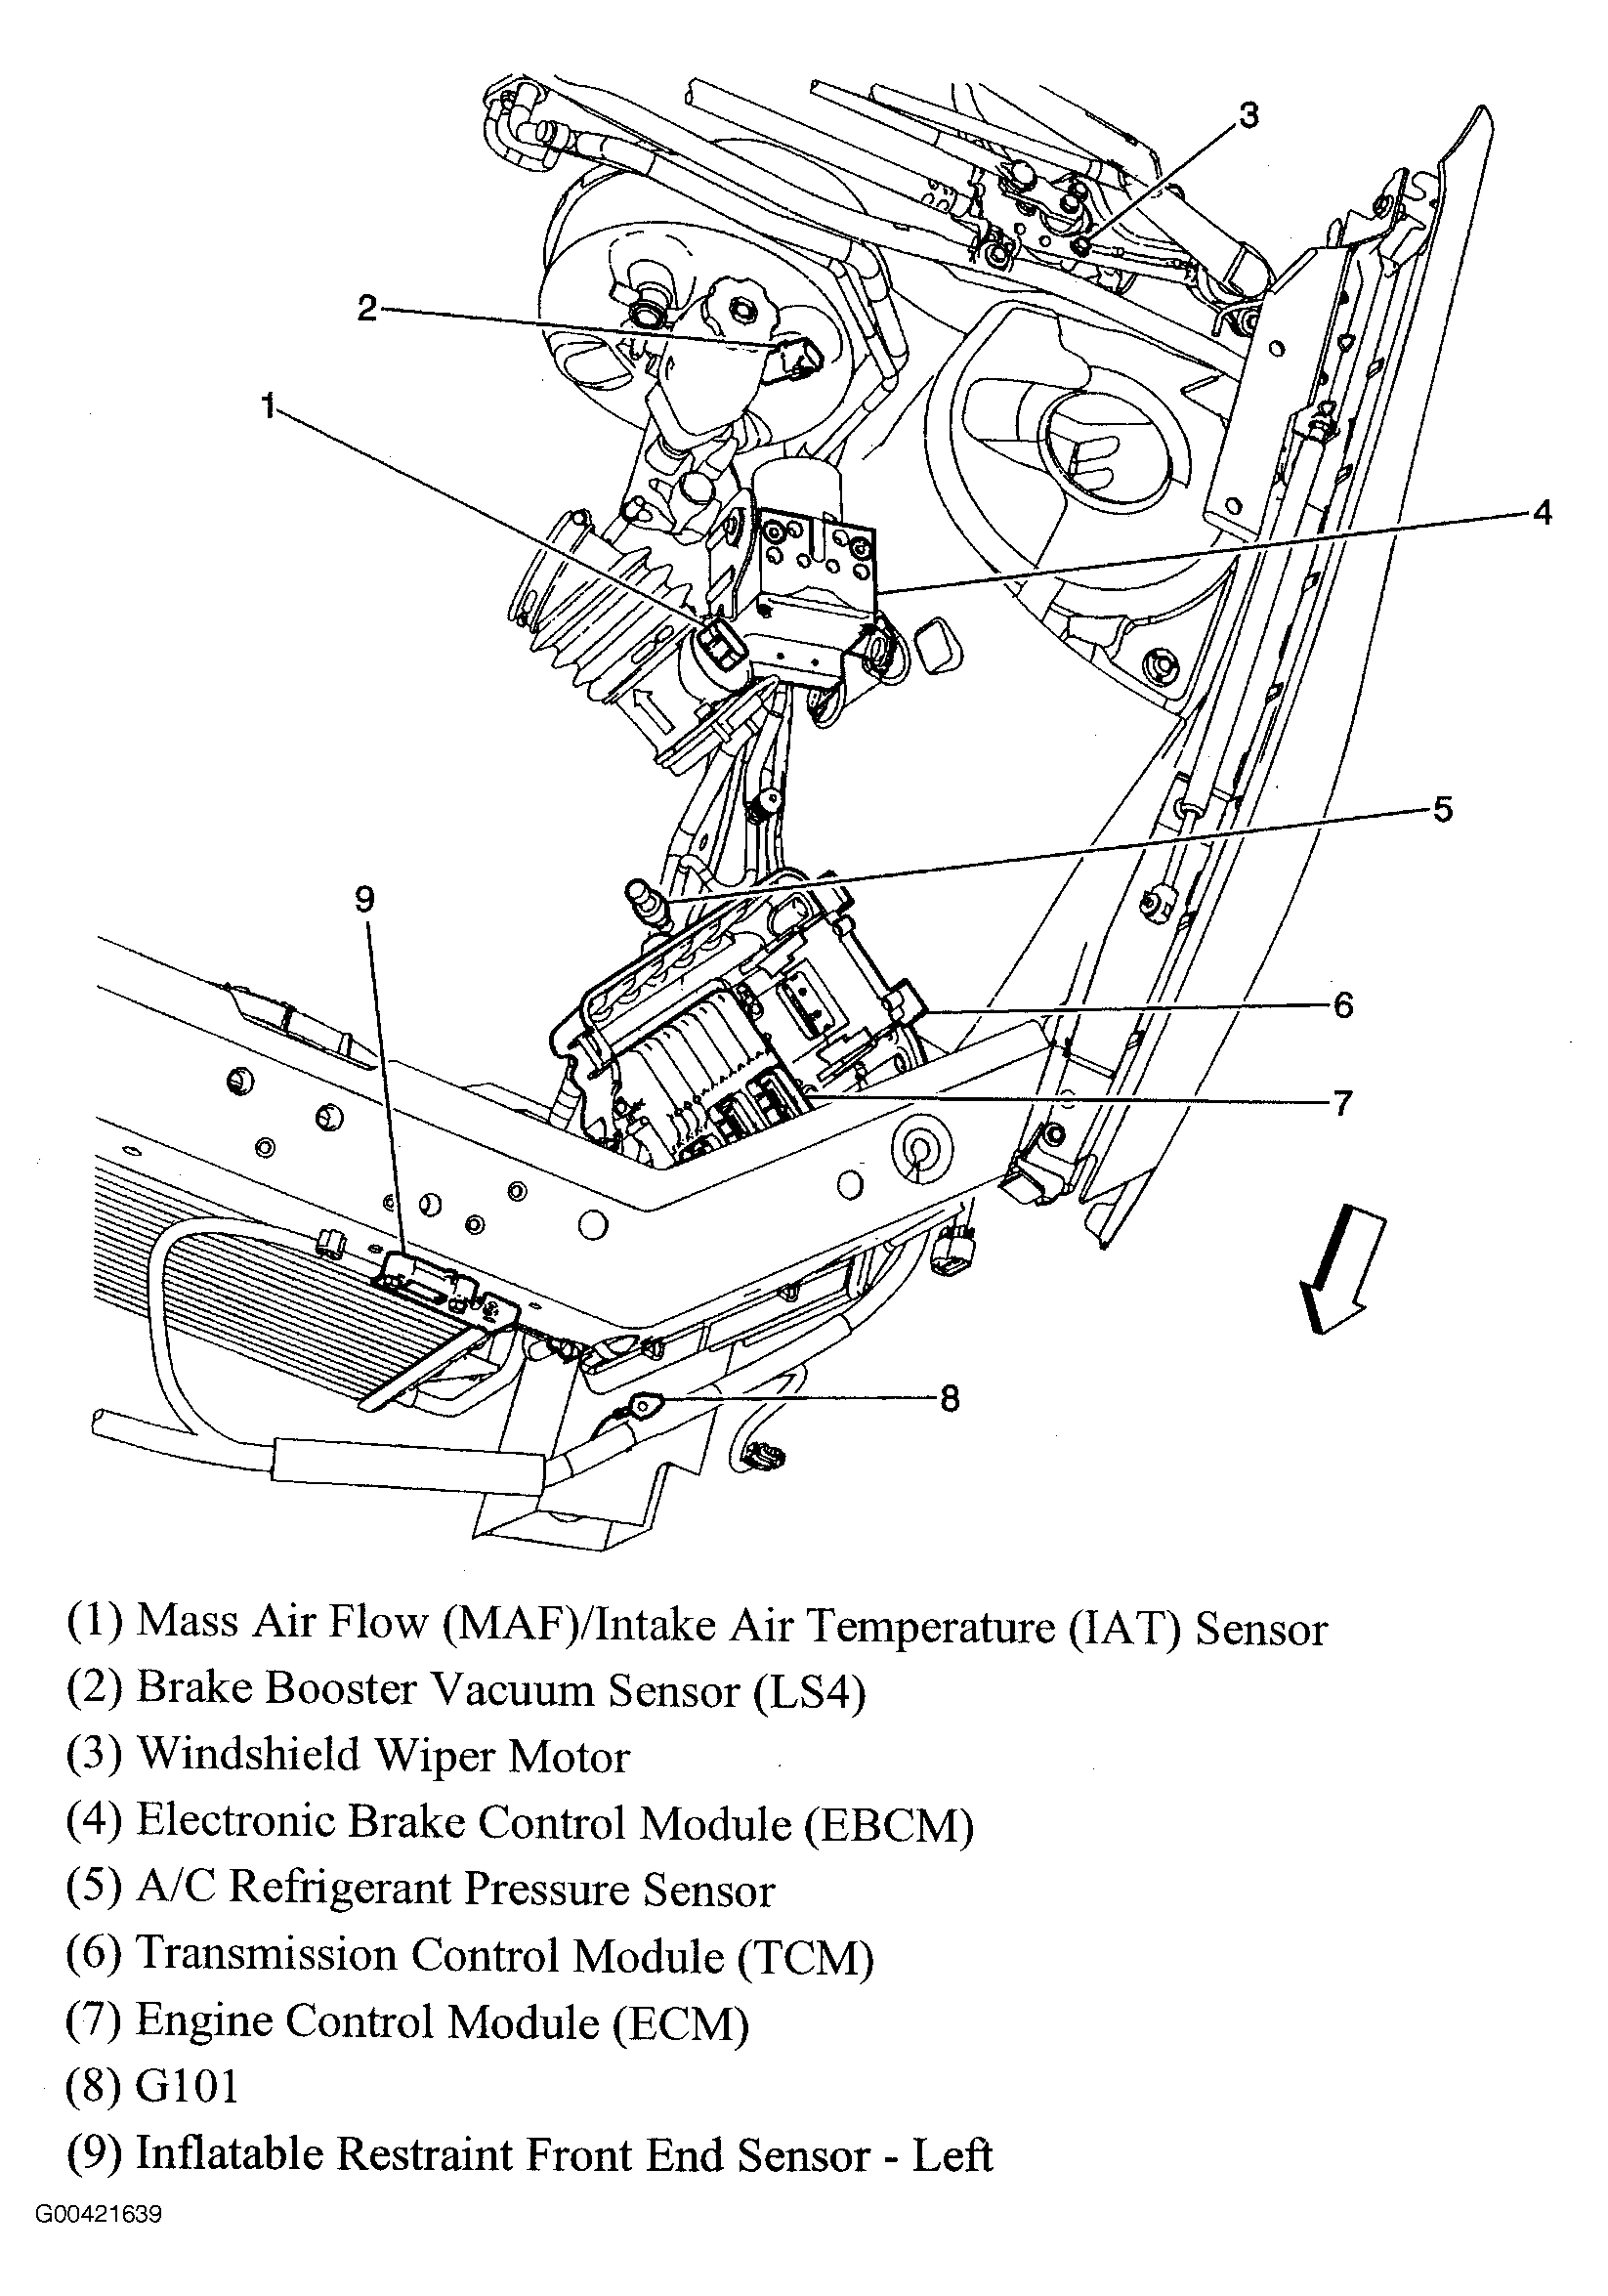 Chevrolet Impala LT 2006 - Component Locations -  Left Front Of Engine Compartment